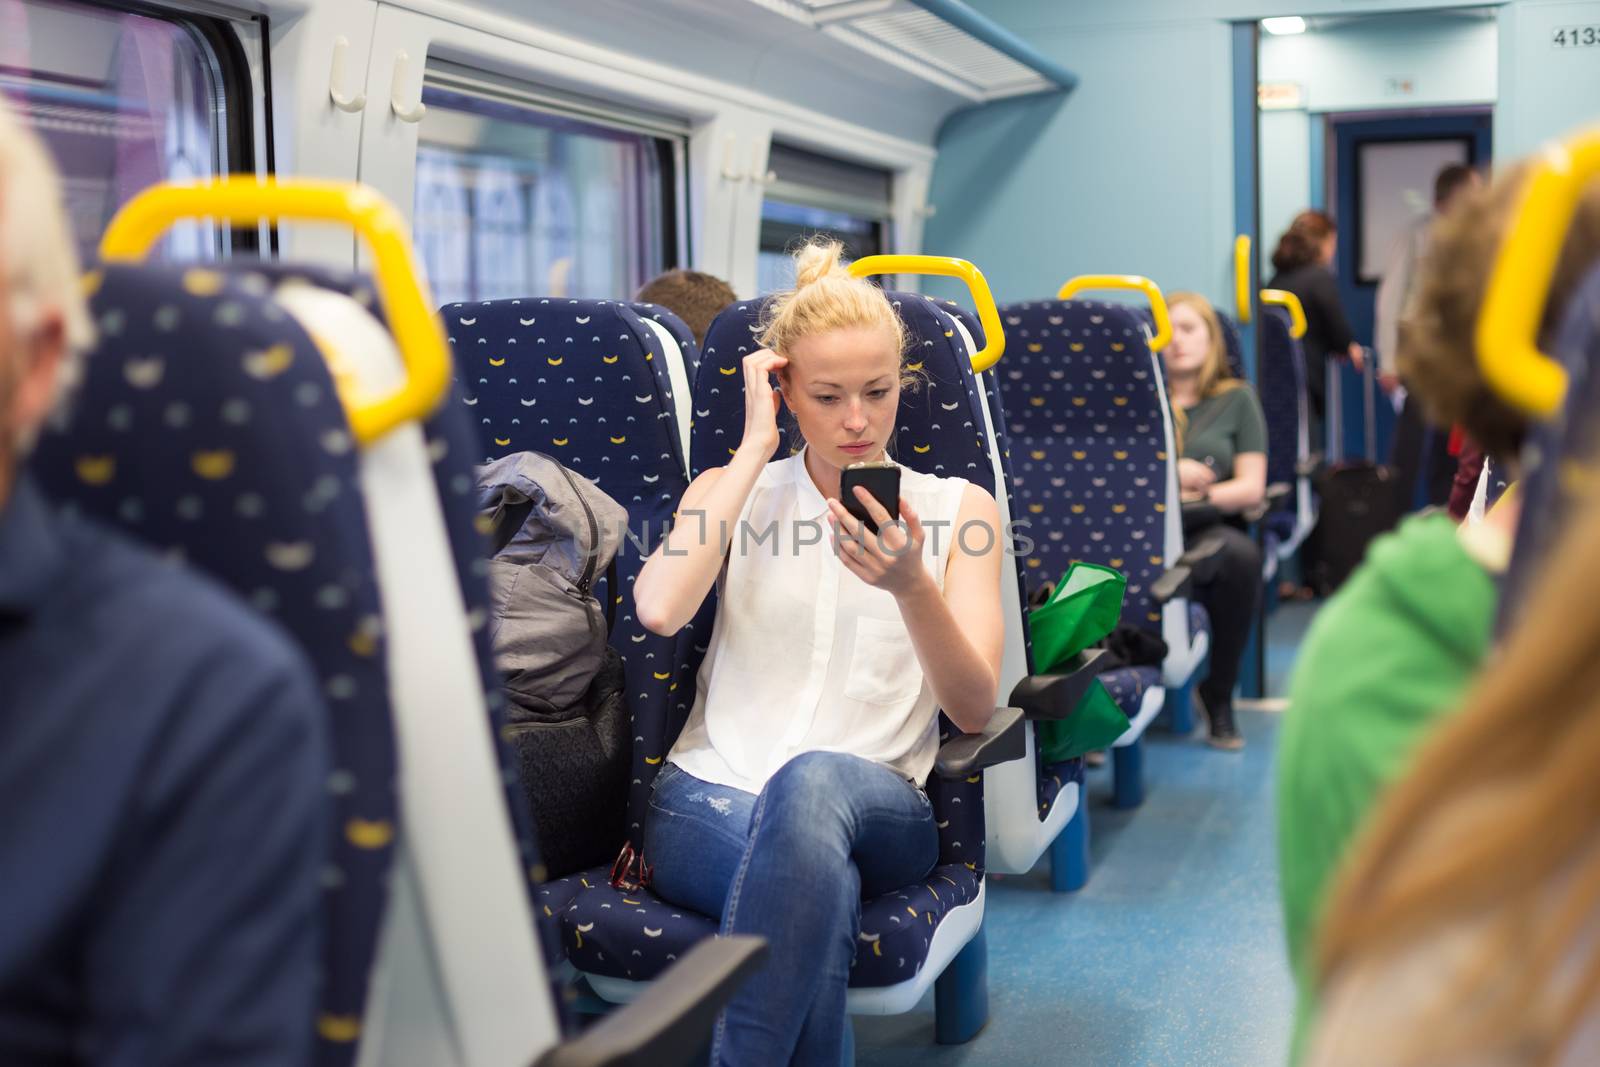 Woman workin on smart phone while traveling by train. Business travel concept.